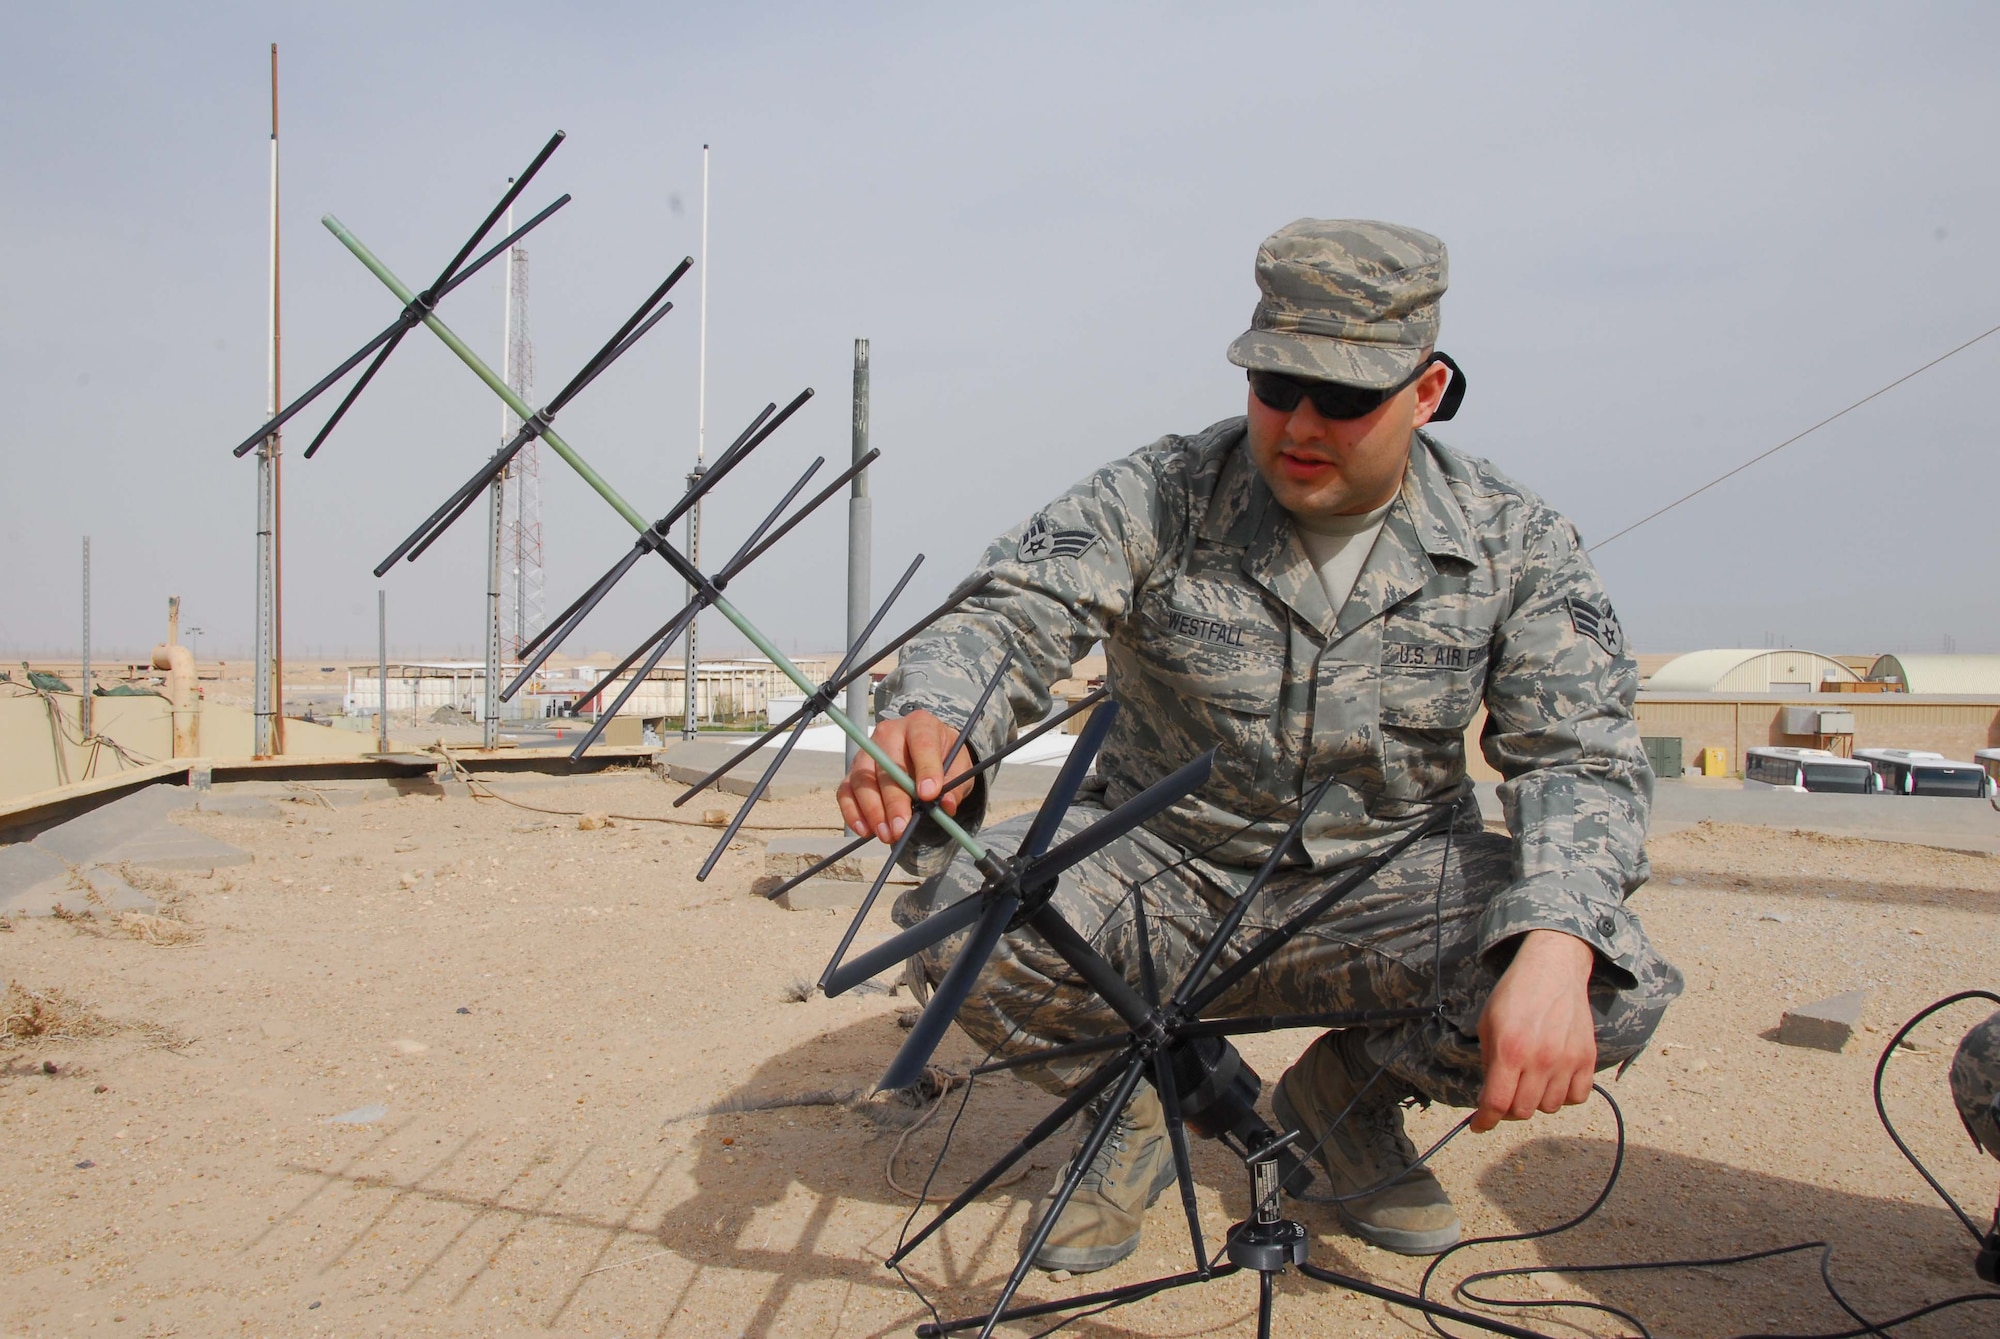 SOUTHWEST ASIA -- Senior Airman Stephon Westfall, 386th Expeditionary Communications Squadron, checks a satellite communication antenna for damage at an air base in Southwest Asia, Feb. 26. If there is any damage to the antenna, such as a bent or broken element, it can affect the performance and workability of the antenna. Airman Westfall is currently deployed from the 141st Air Refueling Wing, an Air National Guard unit, at Fairchild Air Force Base, Wash., and is originally from Spokane, Wash.  (U.S. Air Force photo/ Senior Airman Courtney Richardson)